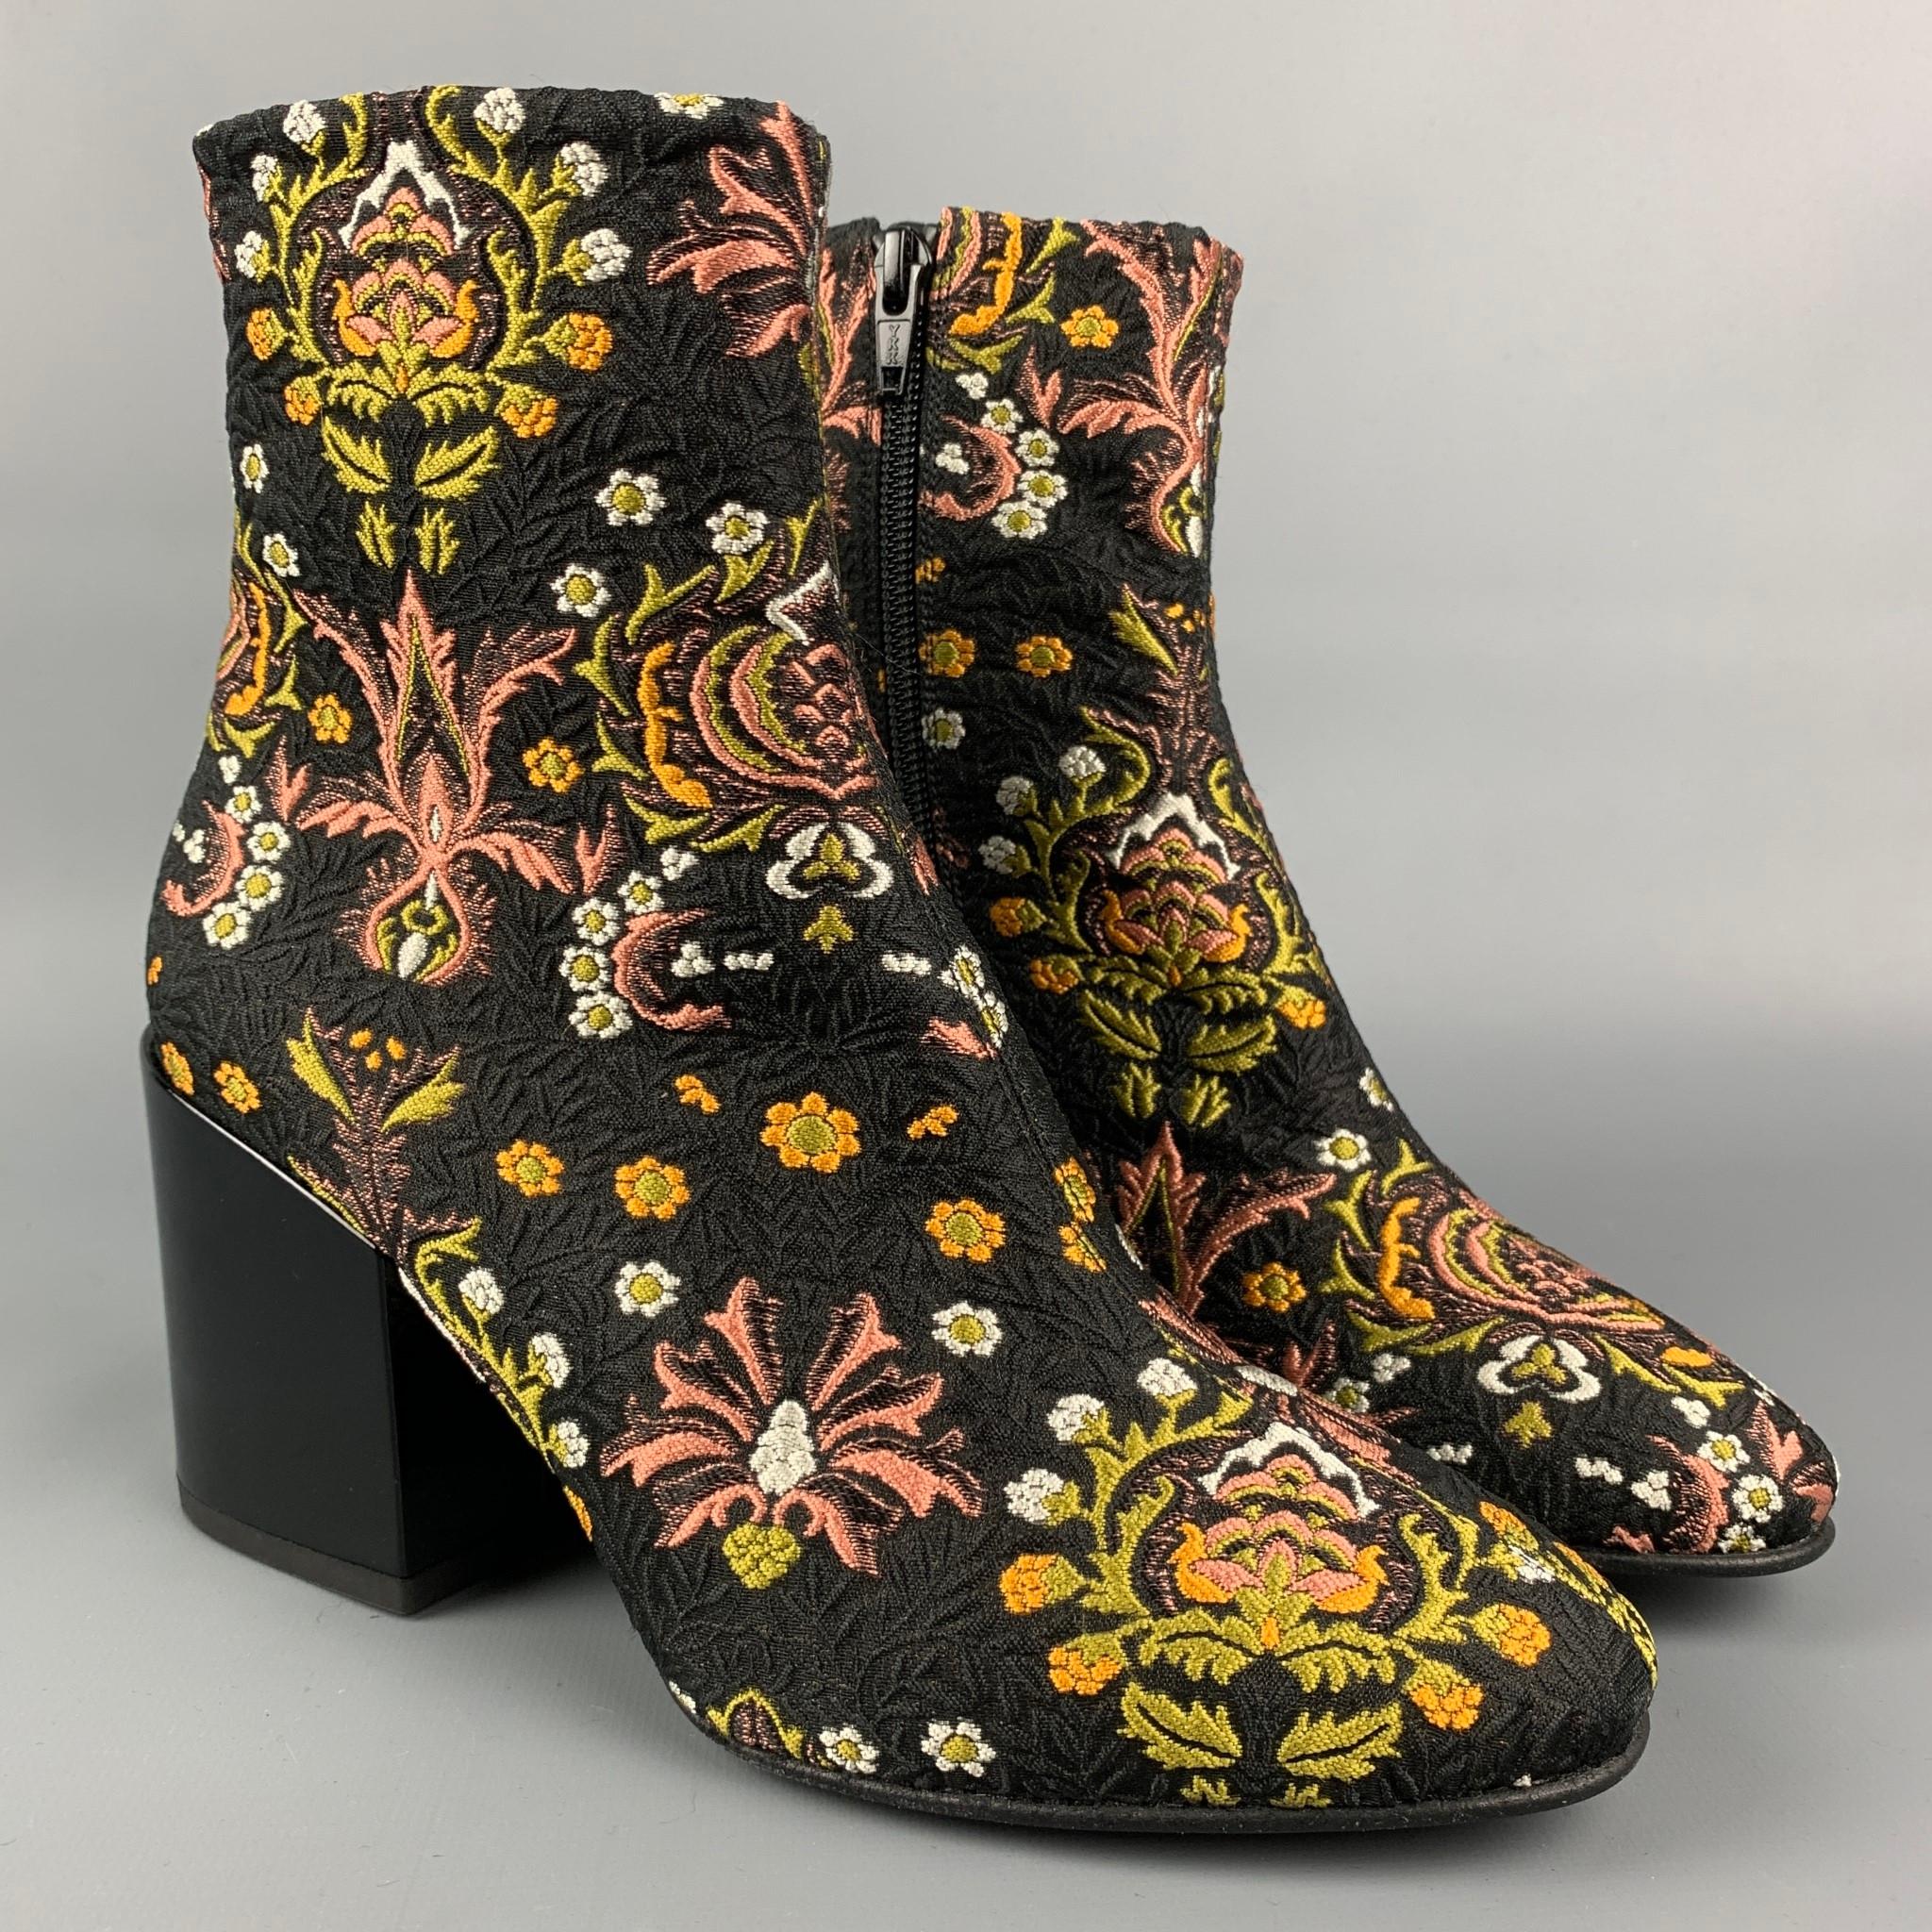 DRIES VAN NOTEN ankle boots comes in a multi-color jacquard material featuring a side zipper and a chunky heel. Made in Italy.

New Without Tags.
Marked: 19652 36

Measurements:

Length: 9 in.
Width: 3 in.
Height: 5 in.
Heel: 3 in.  

SKU: